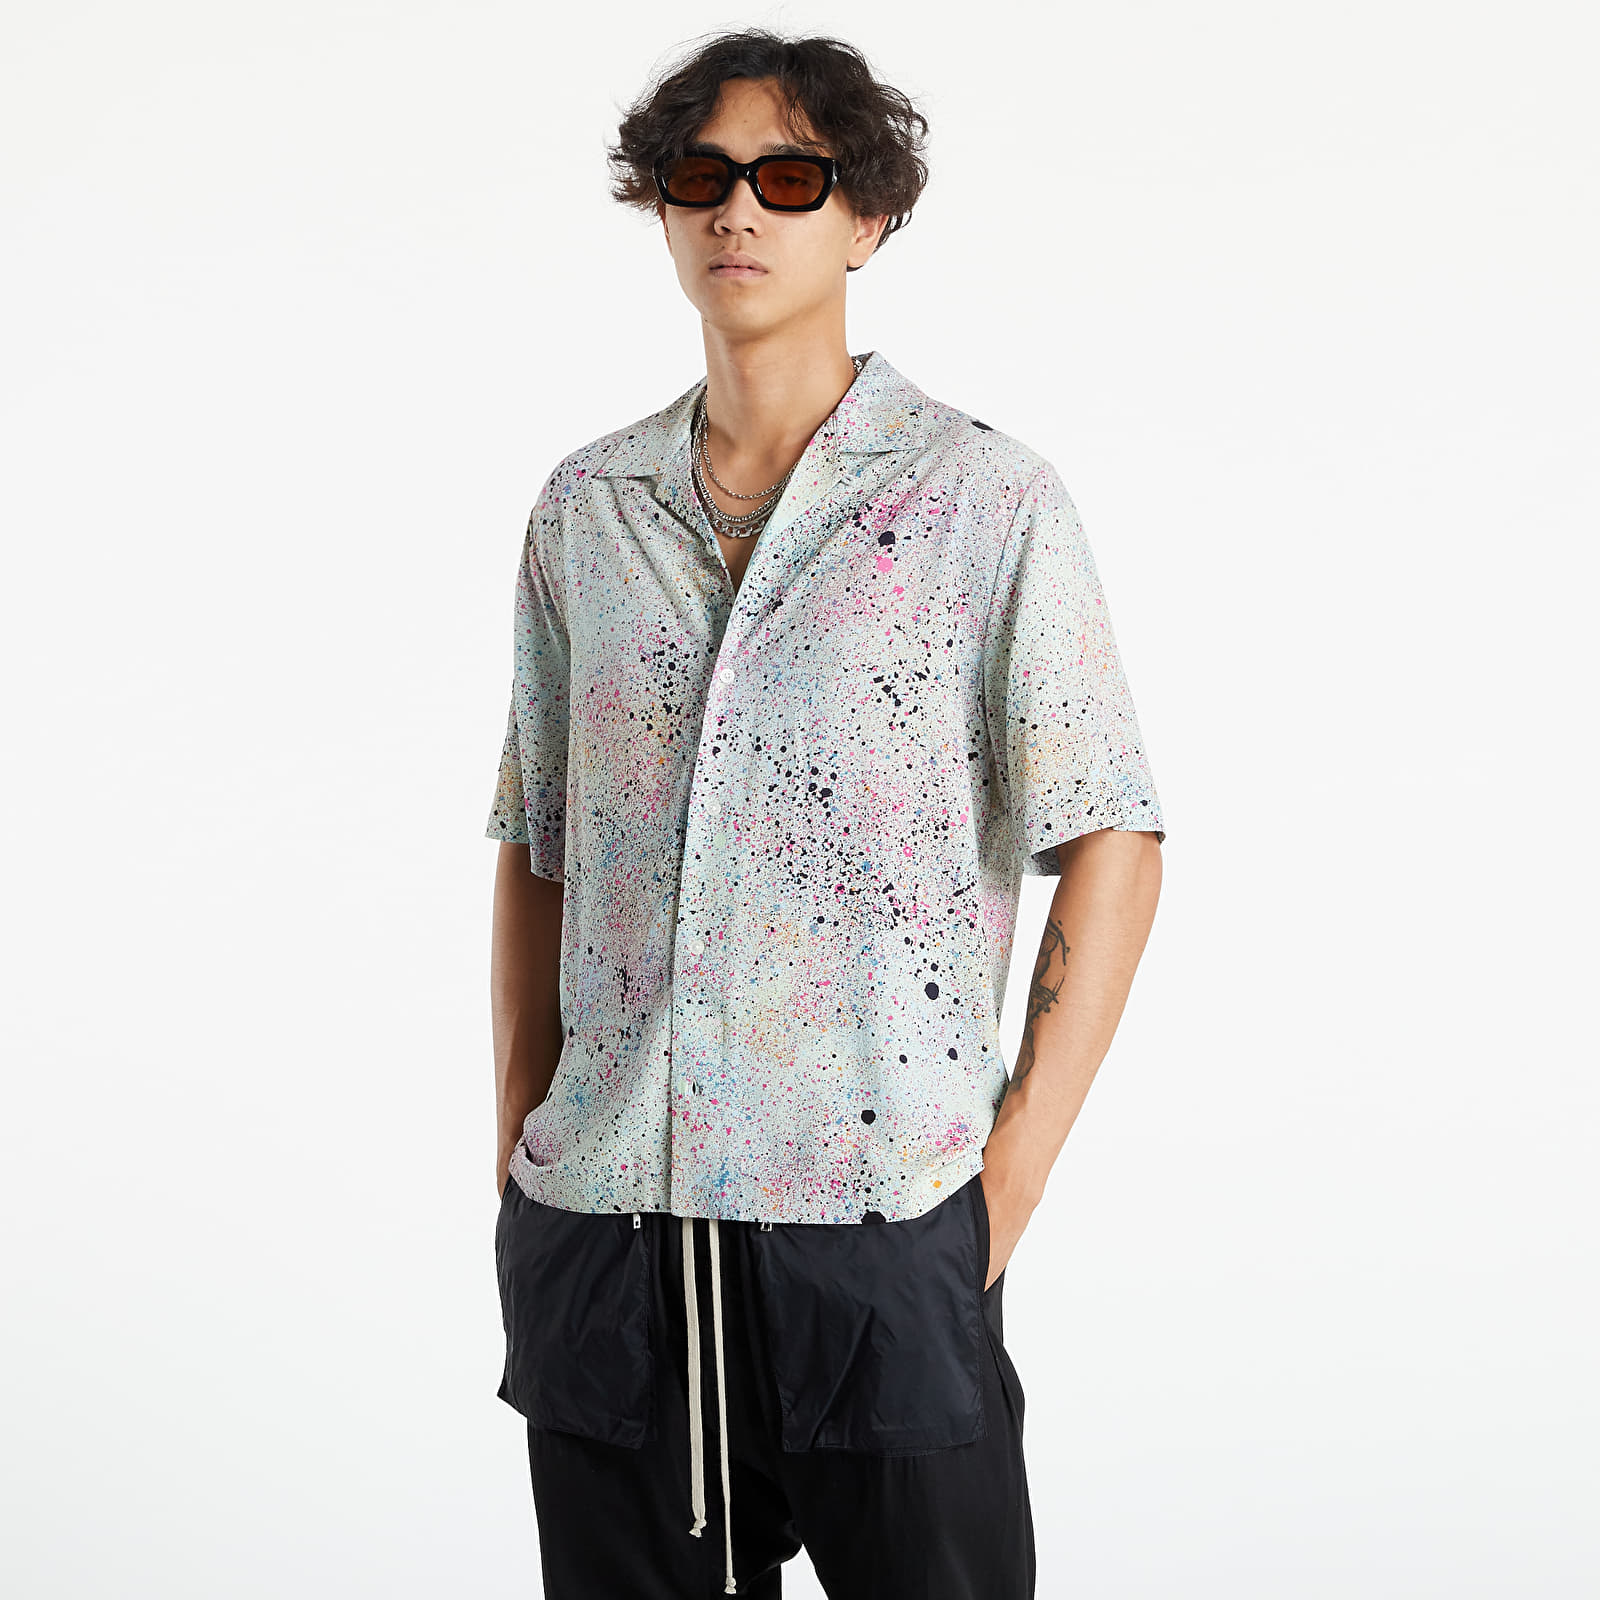 Ризи McQ Br7 Speckle Shirt Mint Light Speckle 972517